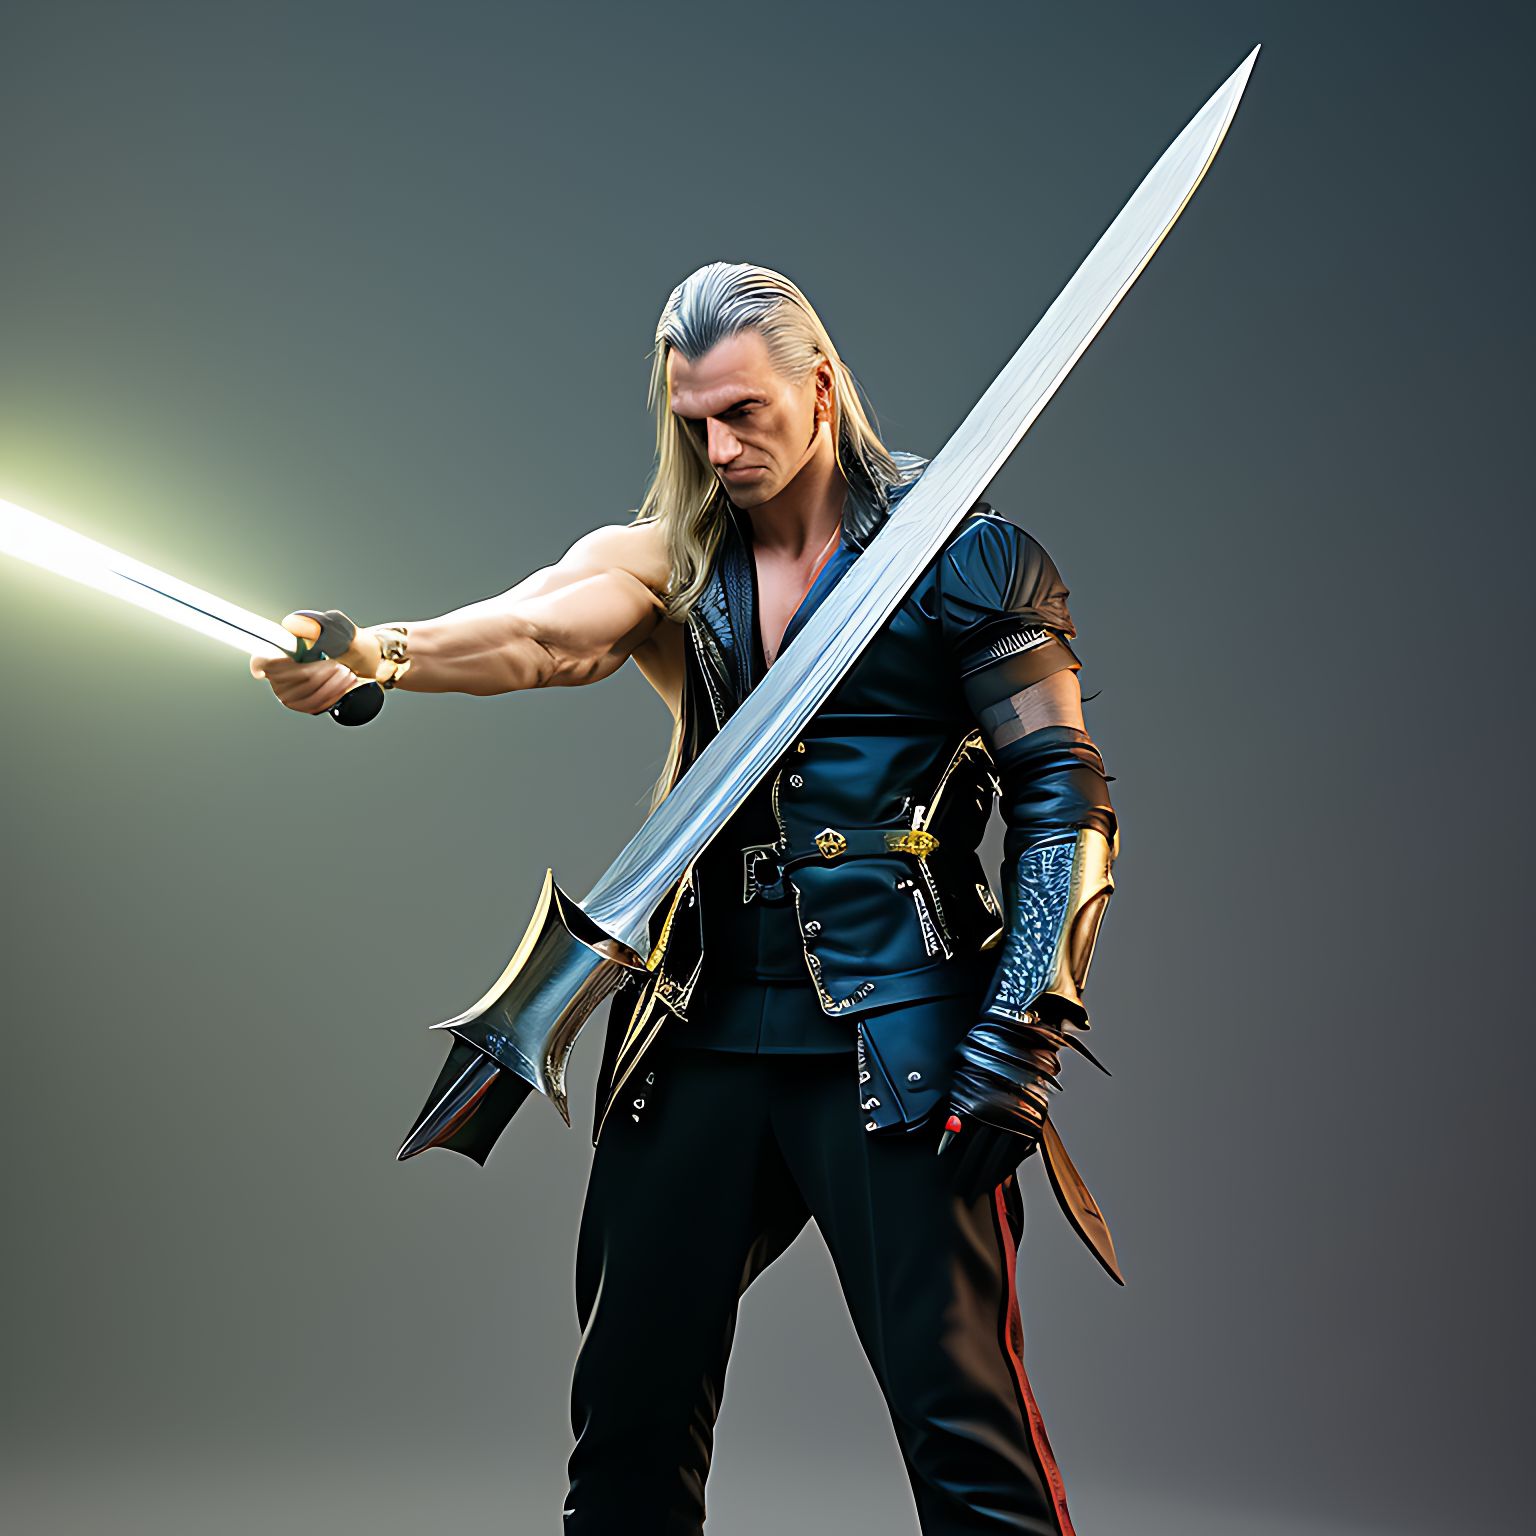 Sephiroth holding a very long sword holding green energy, Cinematic setting, Gradient background, ((insanely dynamic action shot)), Masterpiece, Photorealistic, Ultra realistic, Ultra HDR, Ray tracing, Award winning, 16k resolution, VintageHelper, Vibrant colors, Luxury, Rendered in Cinema4D, Shallow depth of field, Unreal Engine 6, Sigma lens, Hyperrealistic photography, Occult symbol, Victorian era, Full body portrait, 3D photorealism, Big bright eyes, Extremely detailed artwork, Eye-catching, Fantastic realism, Ultra high details